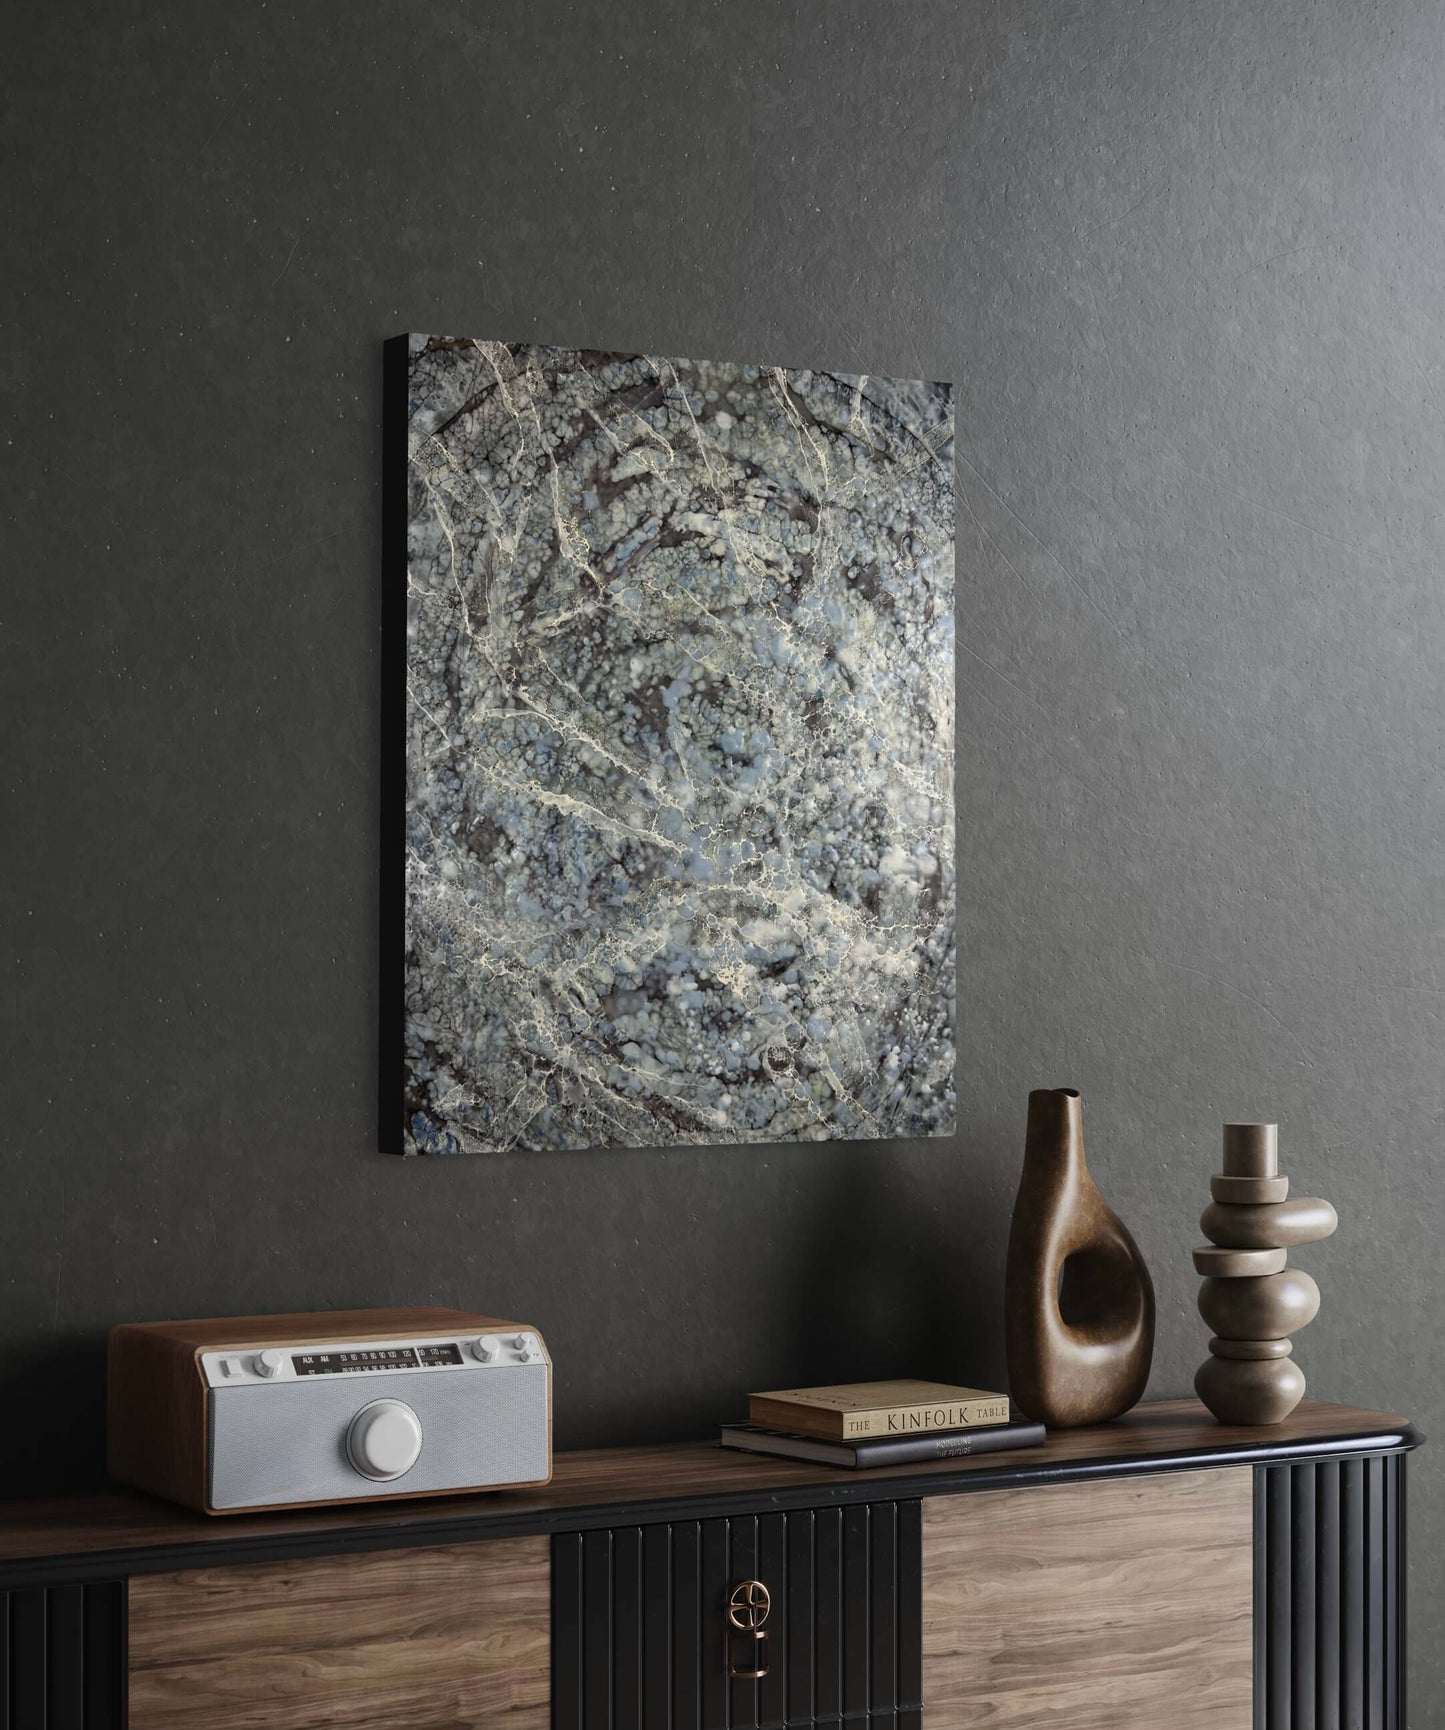 In situ.This painting is created in greys and blues. The dark shellac in the background, creates a downward spiral, as if you are falling into abyss. The white shellac on the foreground is representing your last breath escaping into the ether.